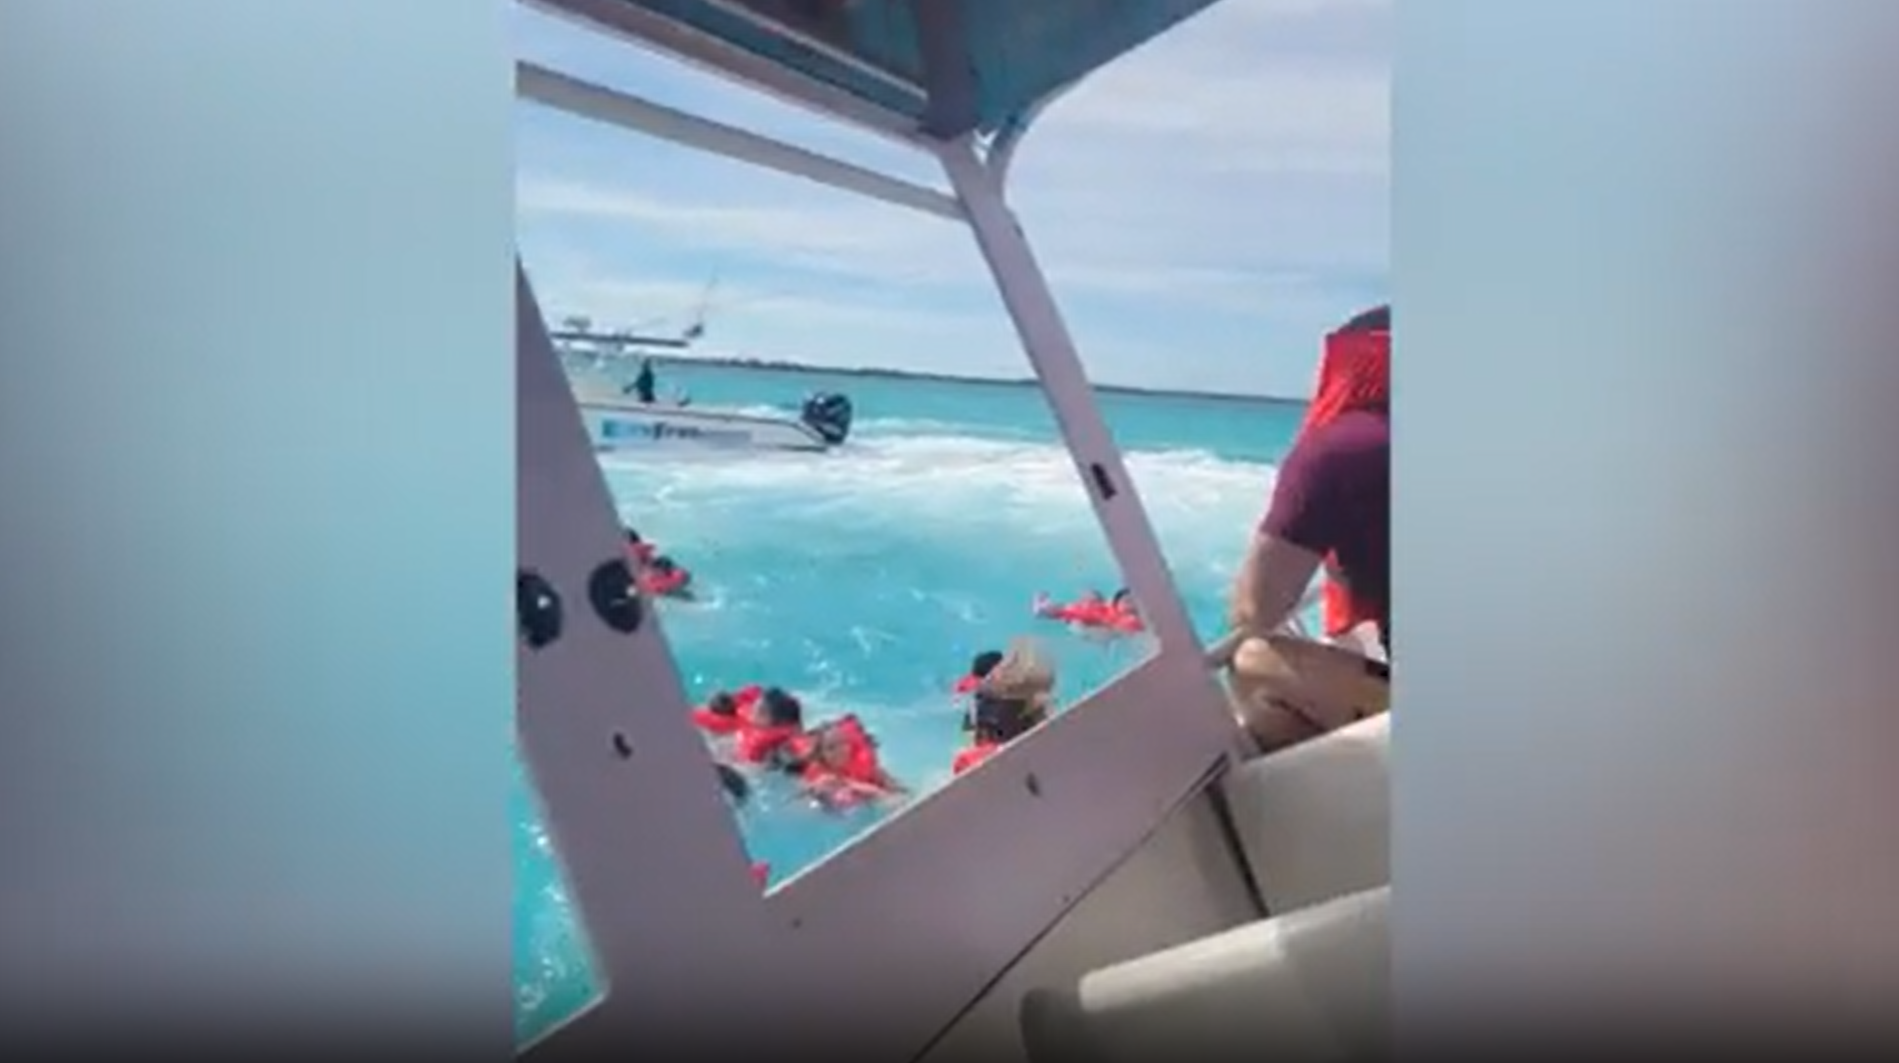 Passengers started to jump into the water after the alleged lack of instructions from the crew